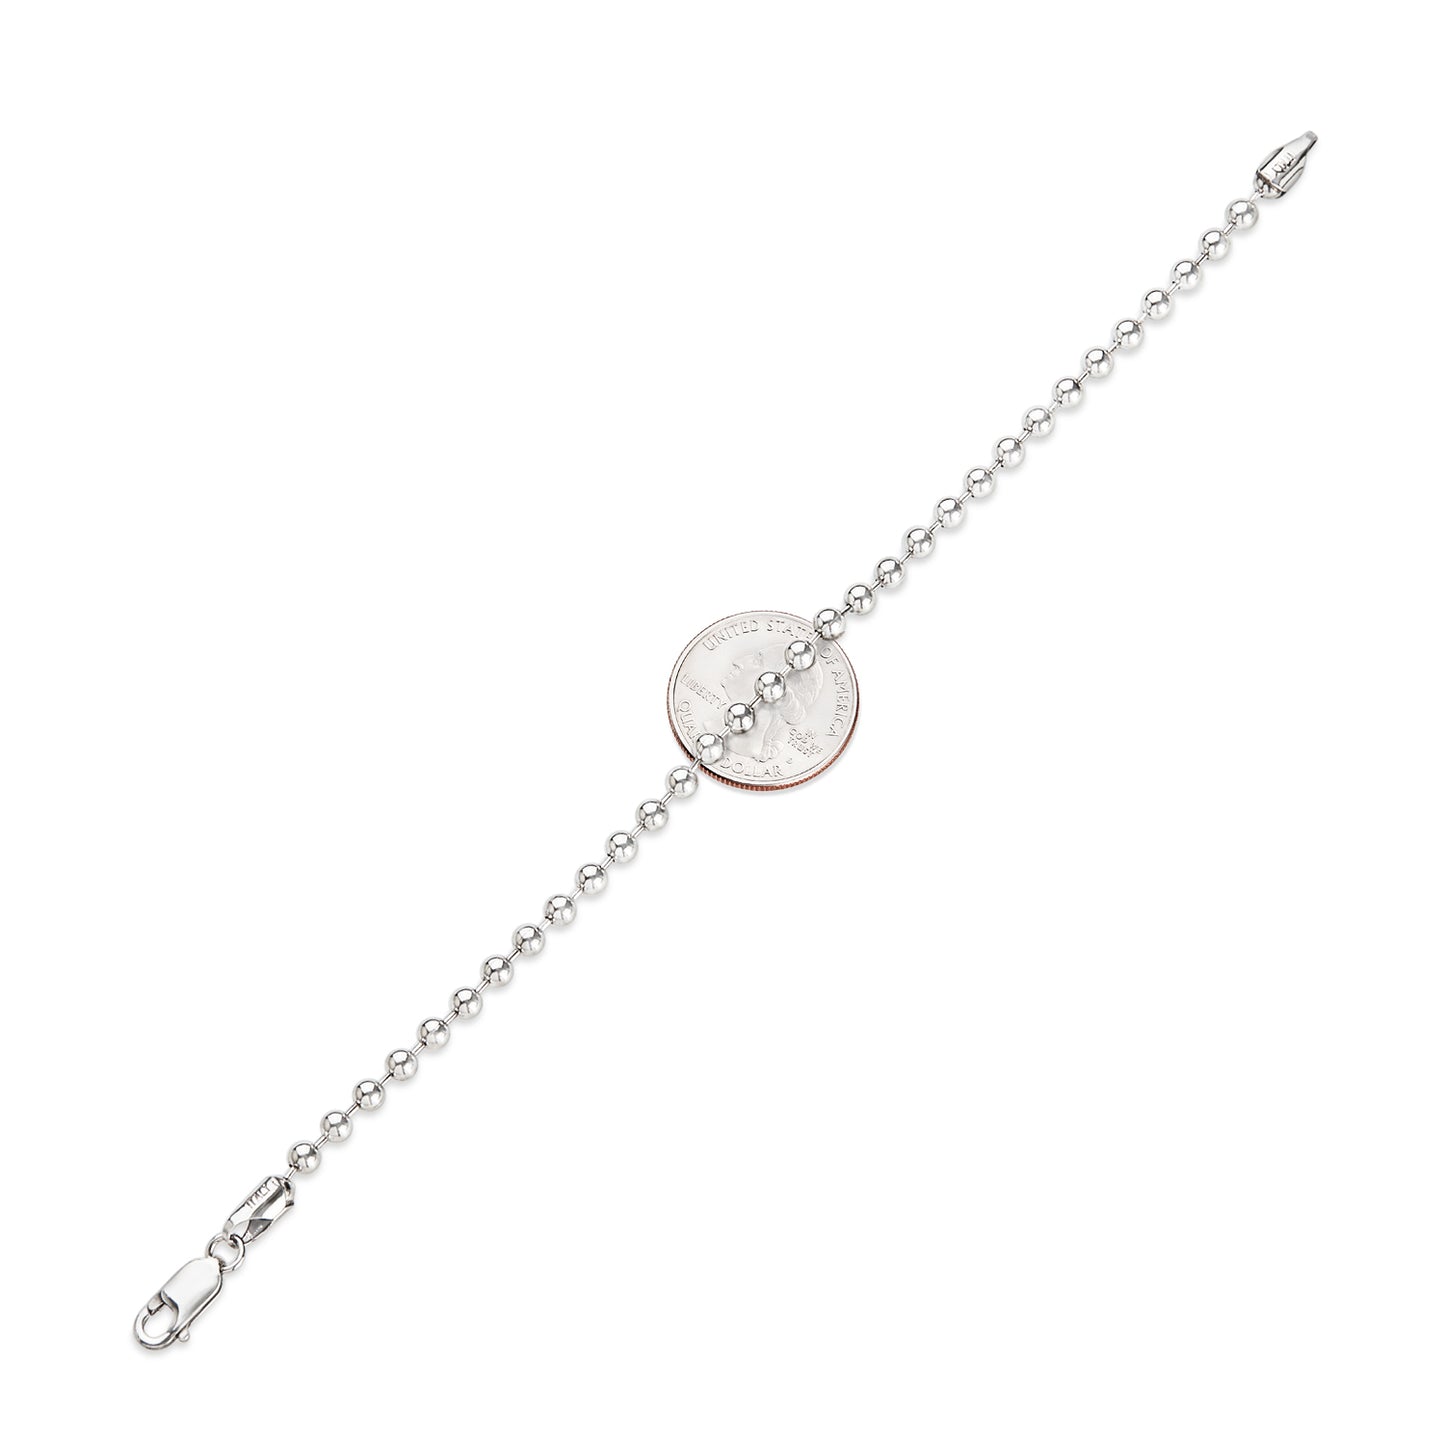 4mm Solid .925 Sterling Silver Military Ball Chain Bracelet (SKU: NEC623B)